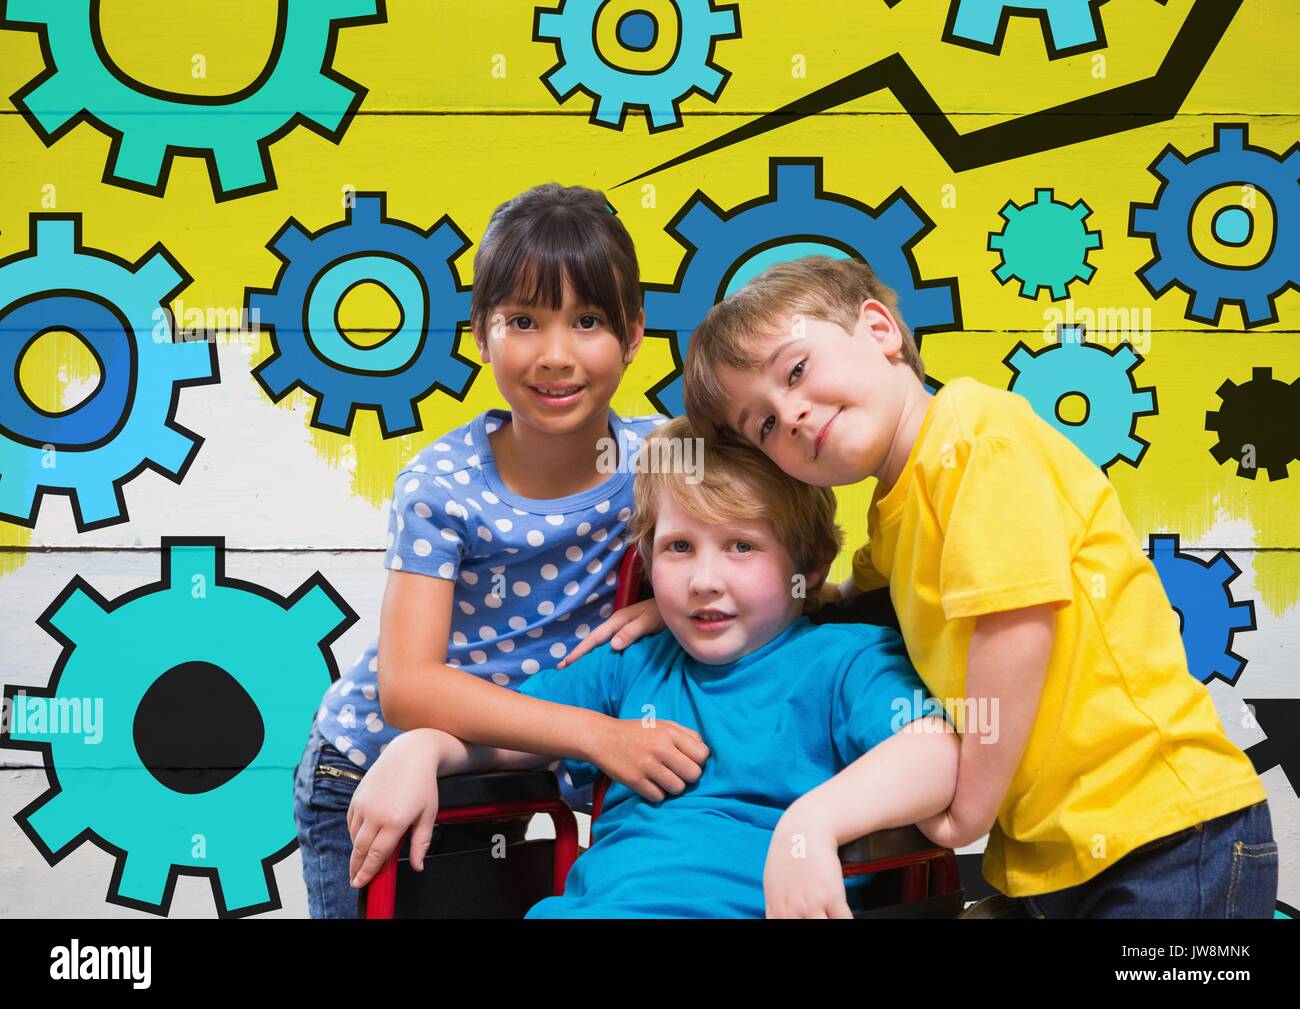 Digital composite of Disabled boy in wheelchair with friends and colorful settings cog gears Stock Photo